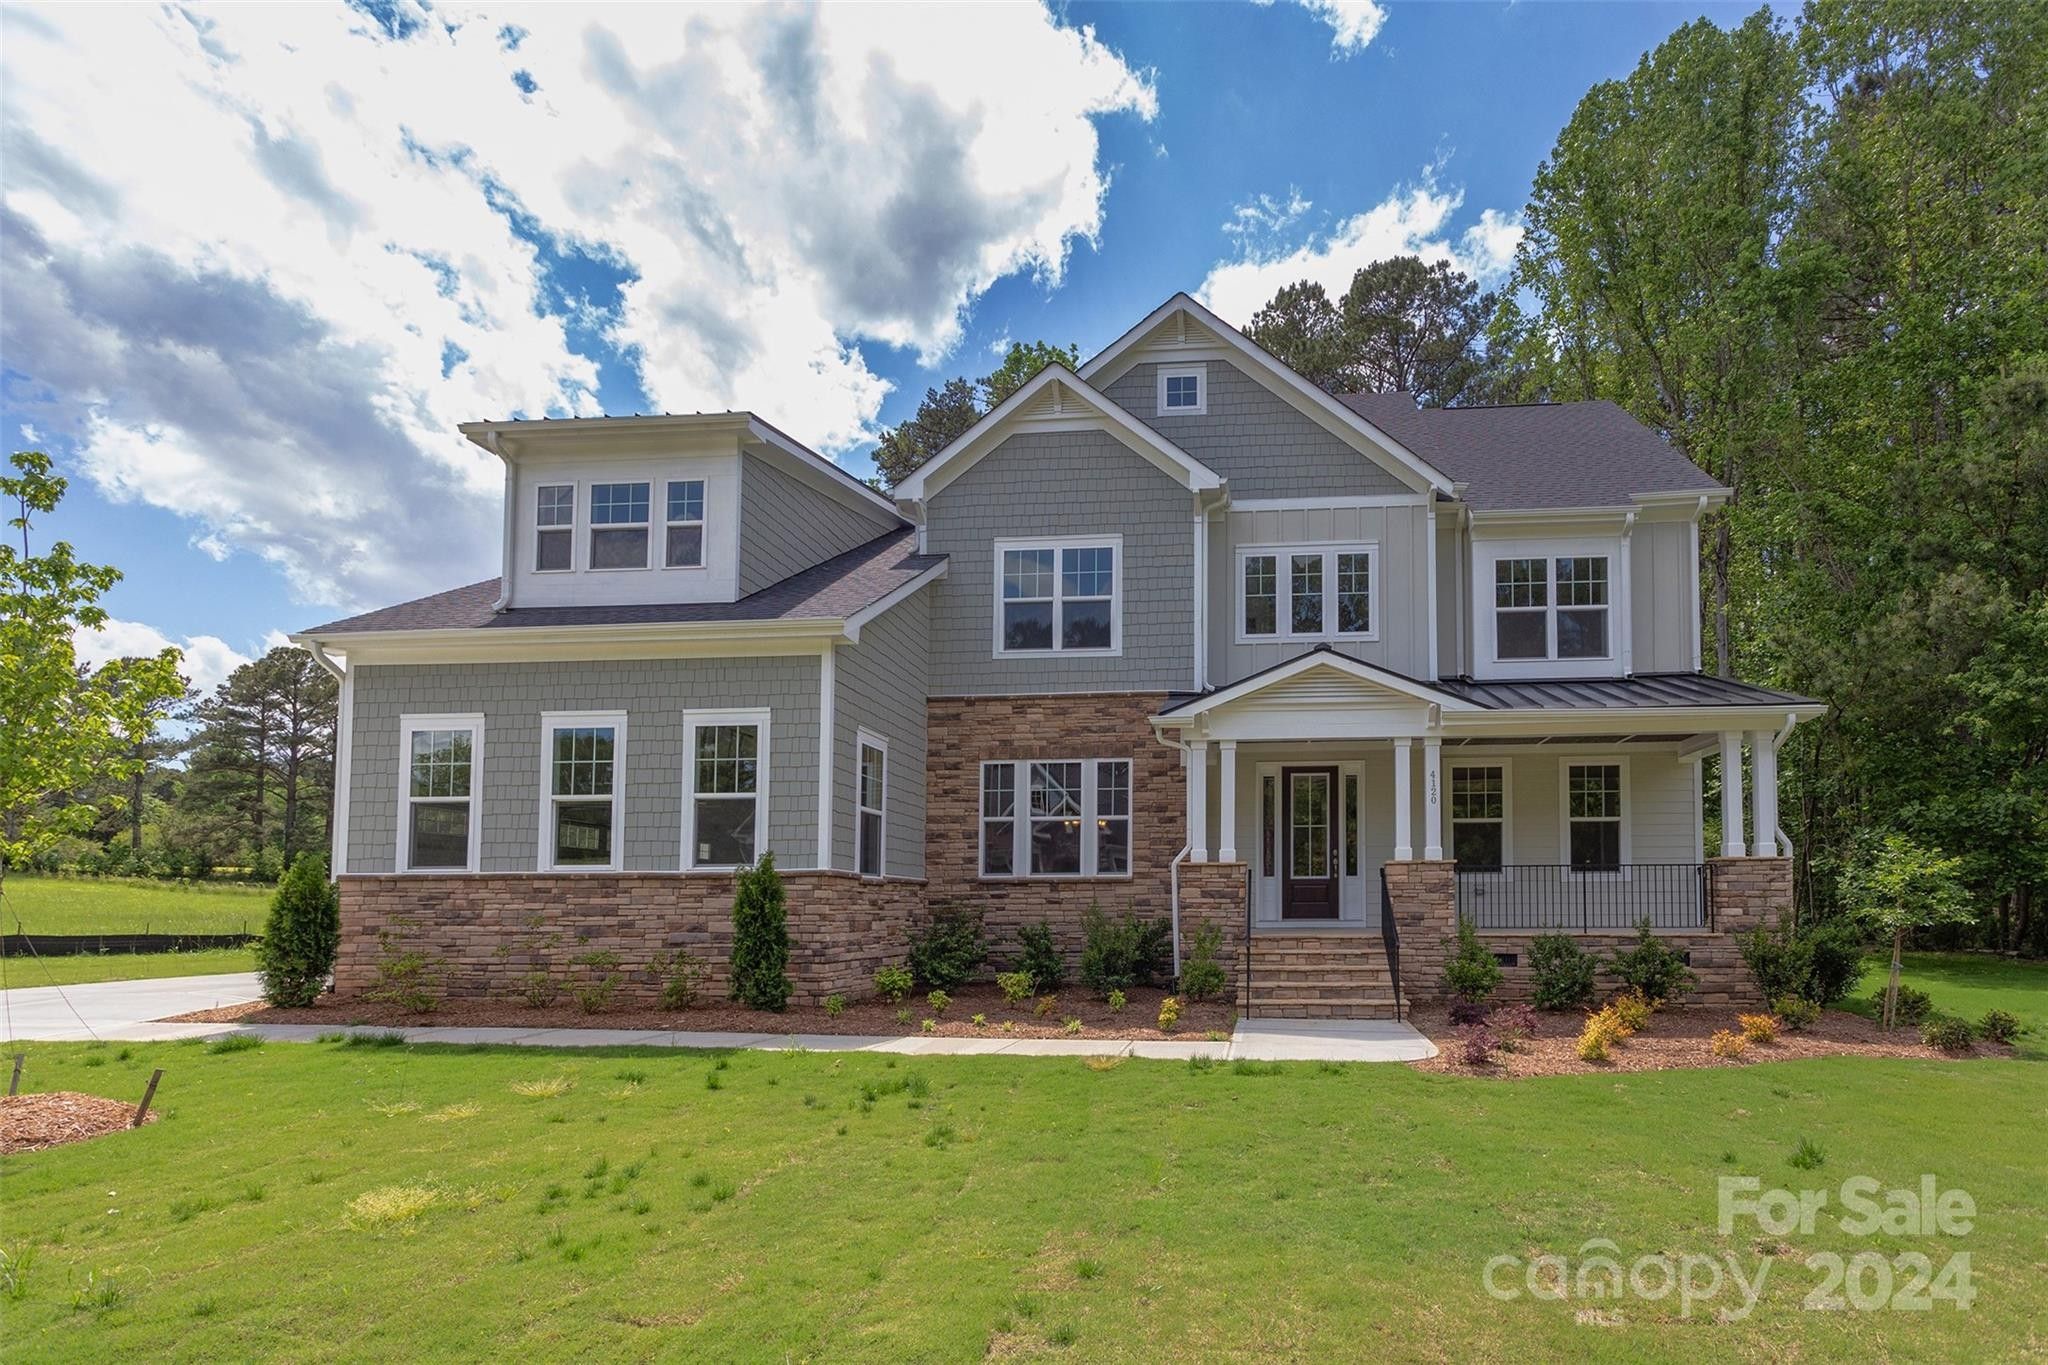 0000 Crown Terrace. Hickory, NC 28601